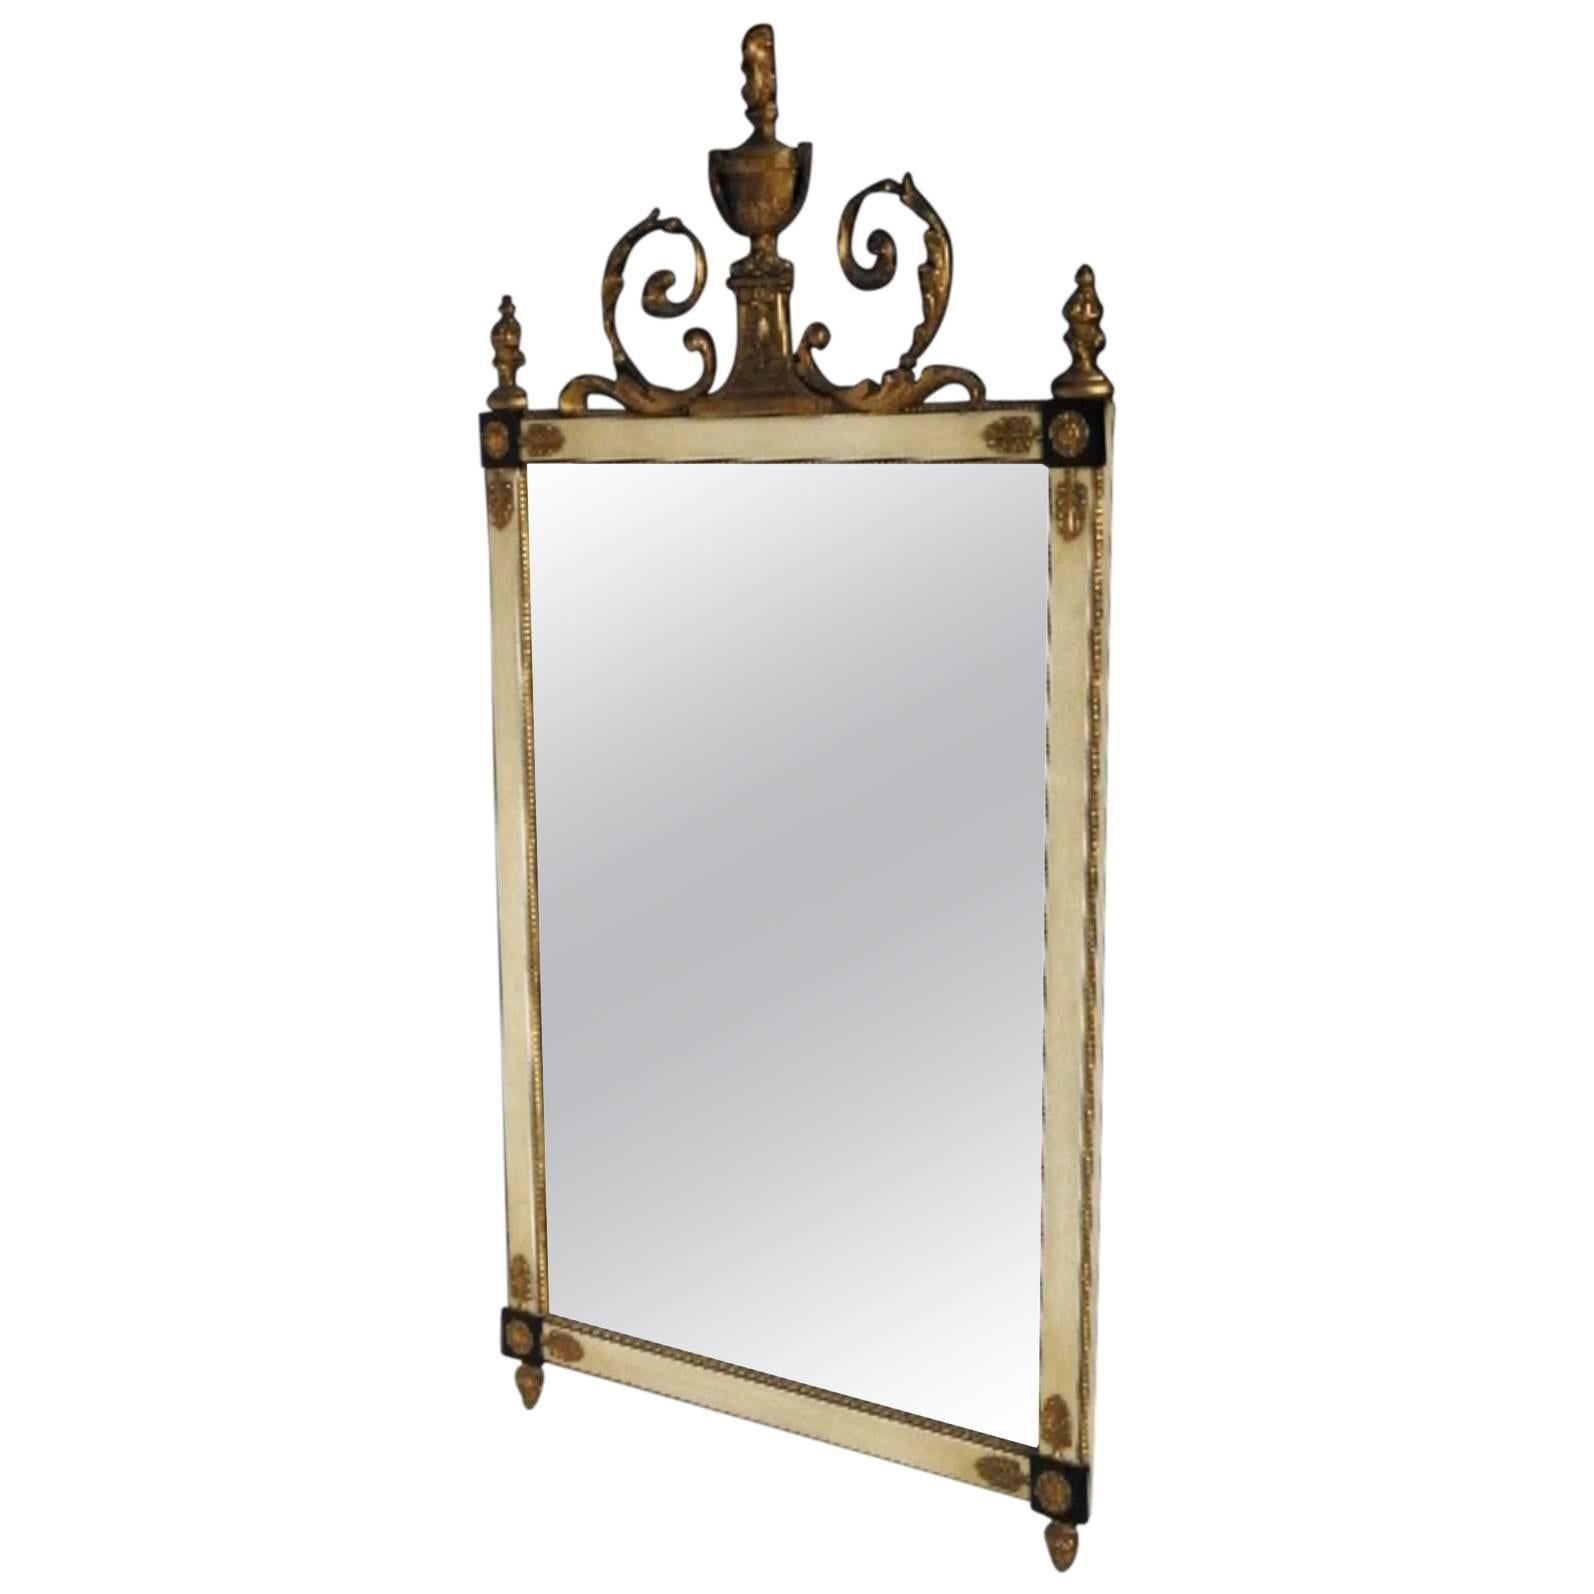 Friedman Brothers Neoclassical Style Mirror For Sale